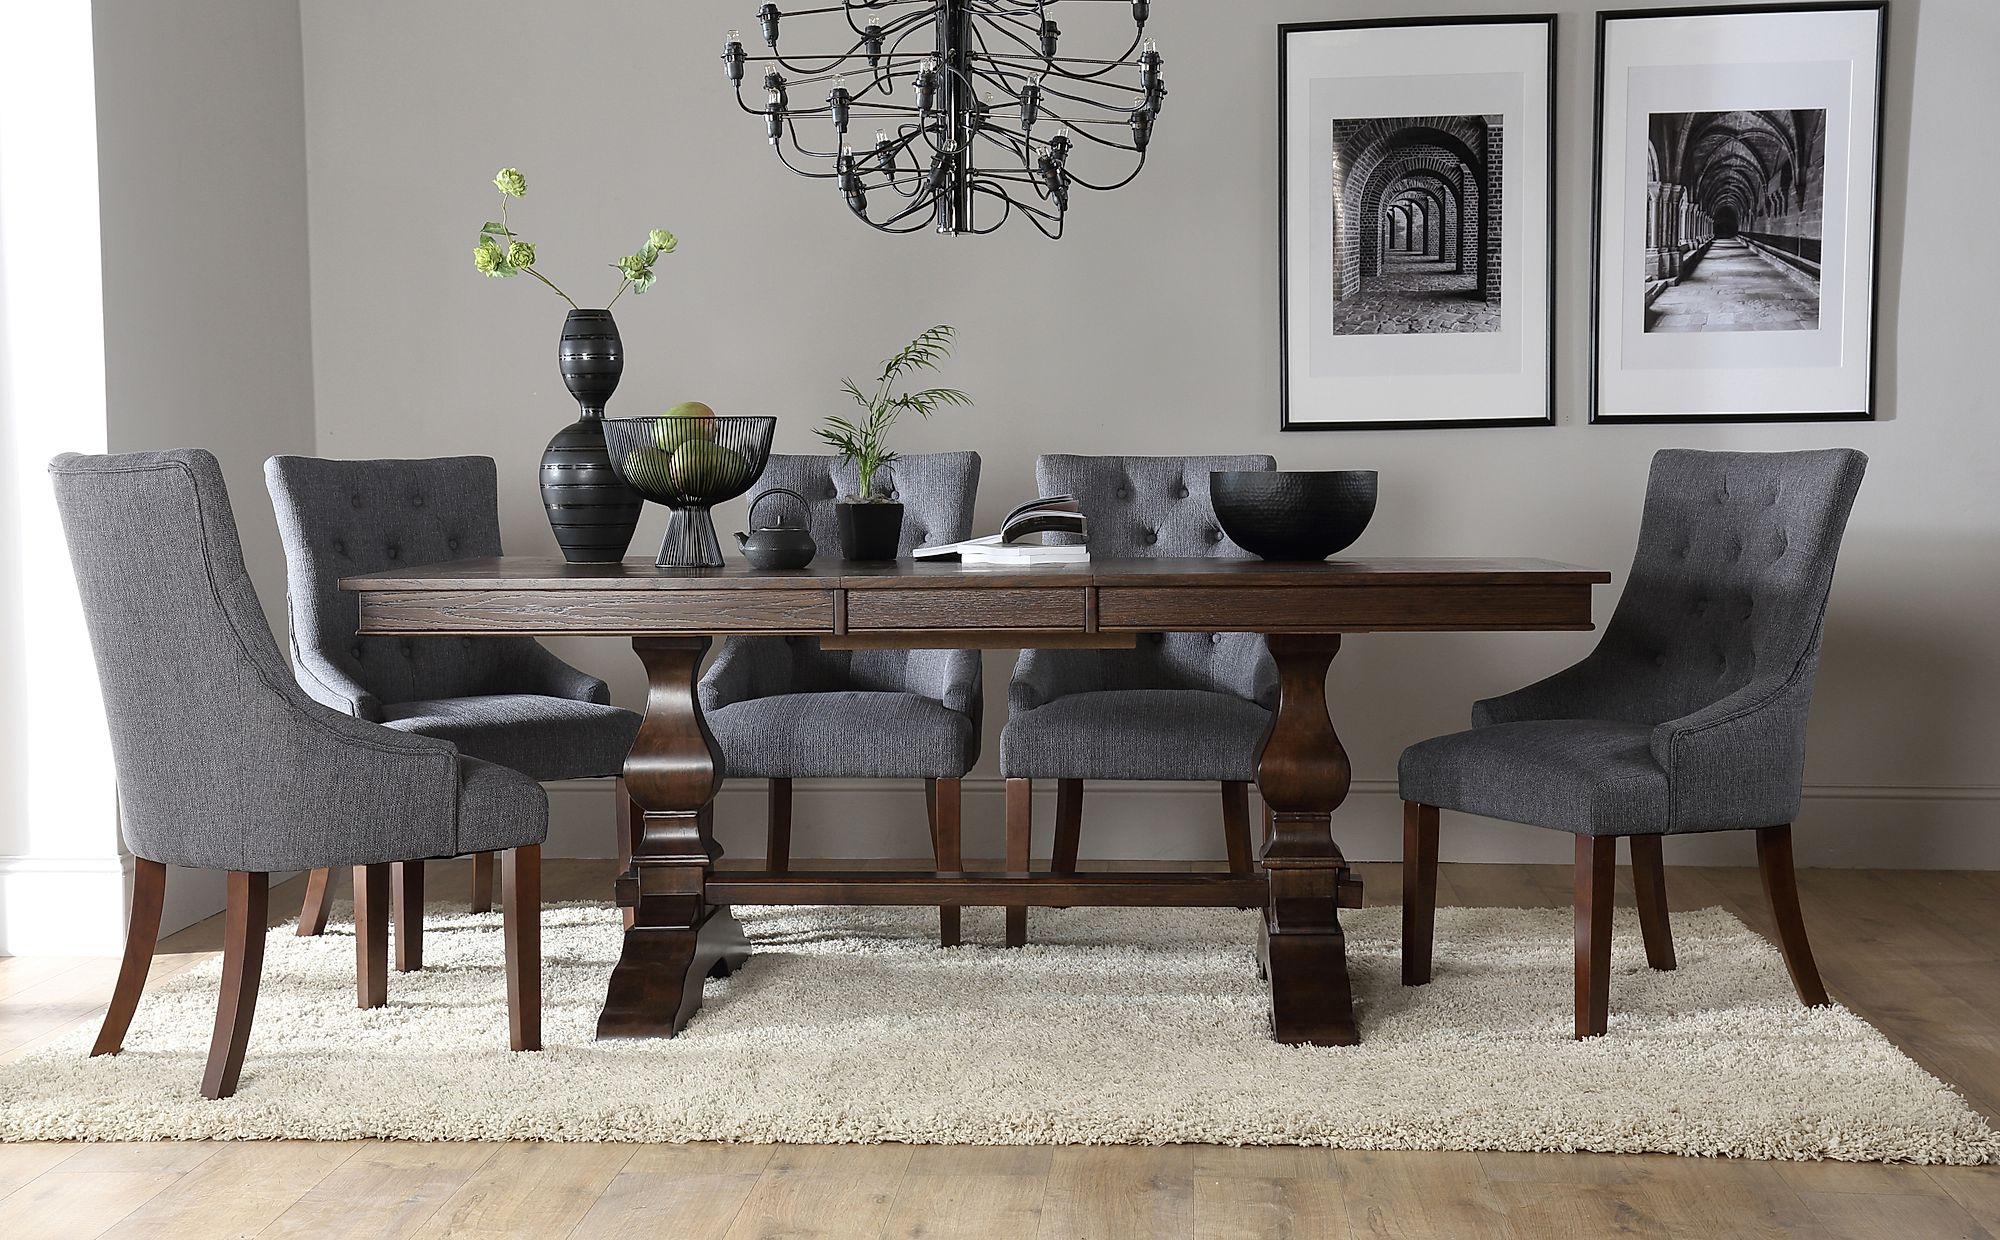 Dark Wooden Dining Table Set : Dark Wood Dining Room Table with Six